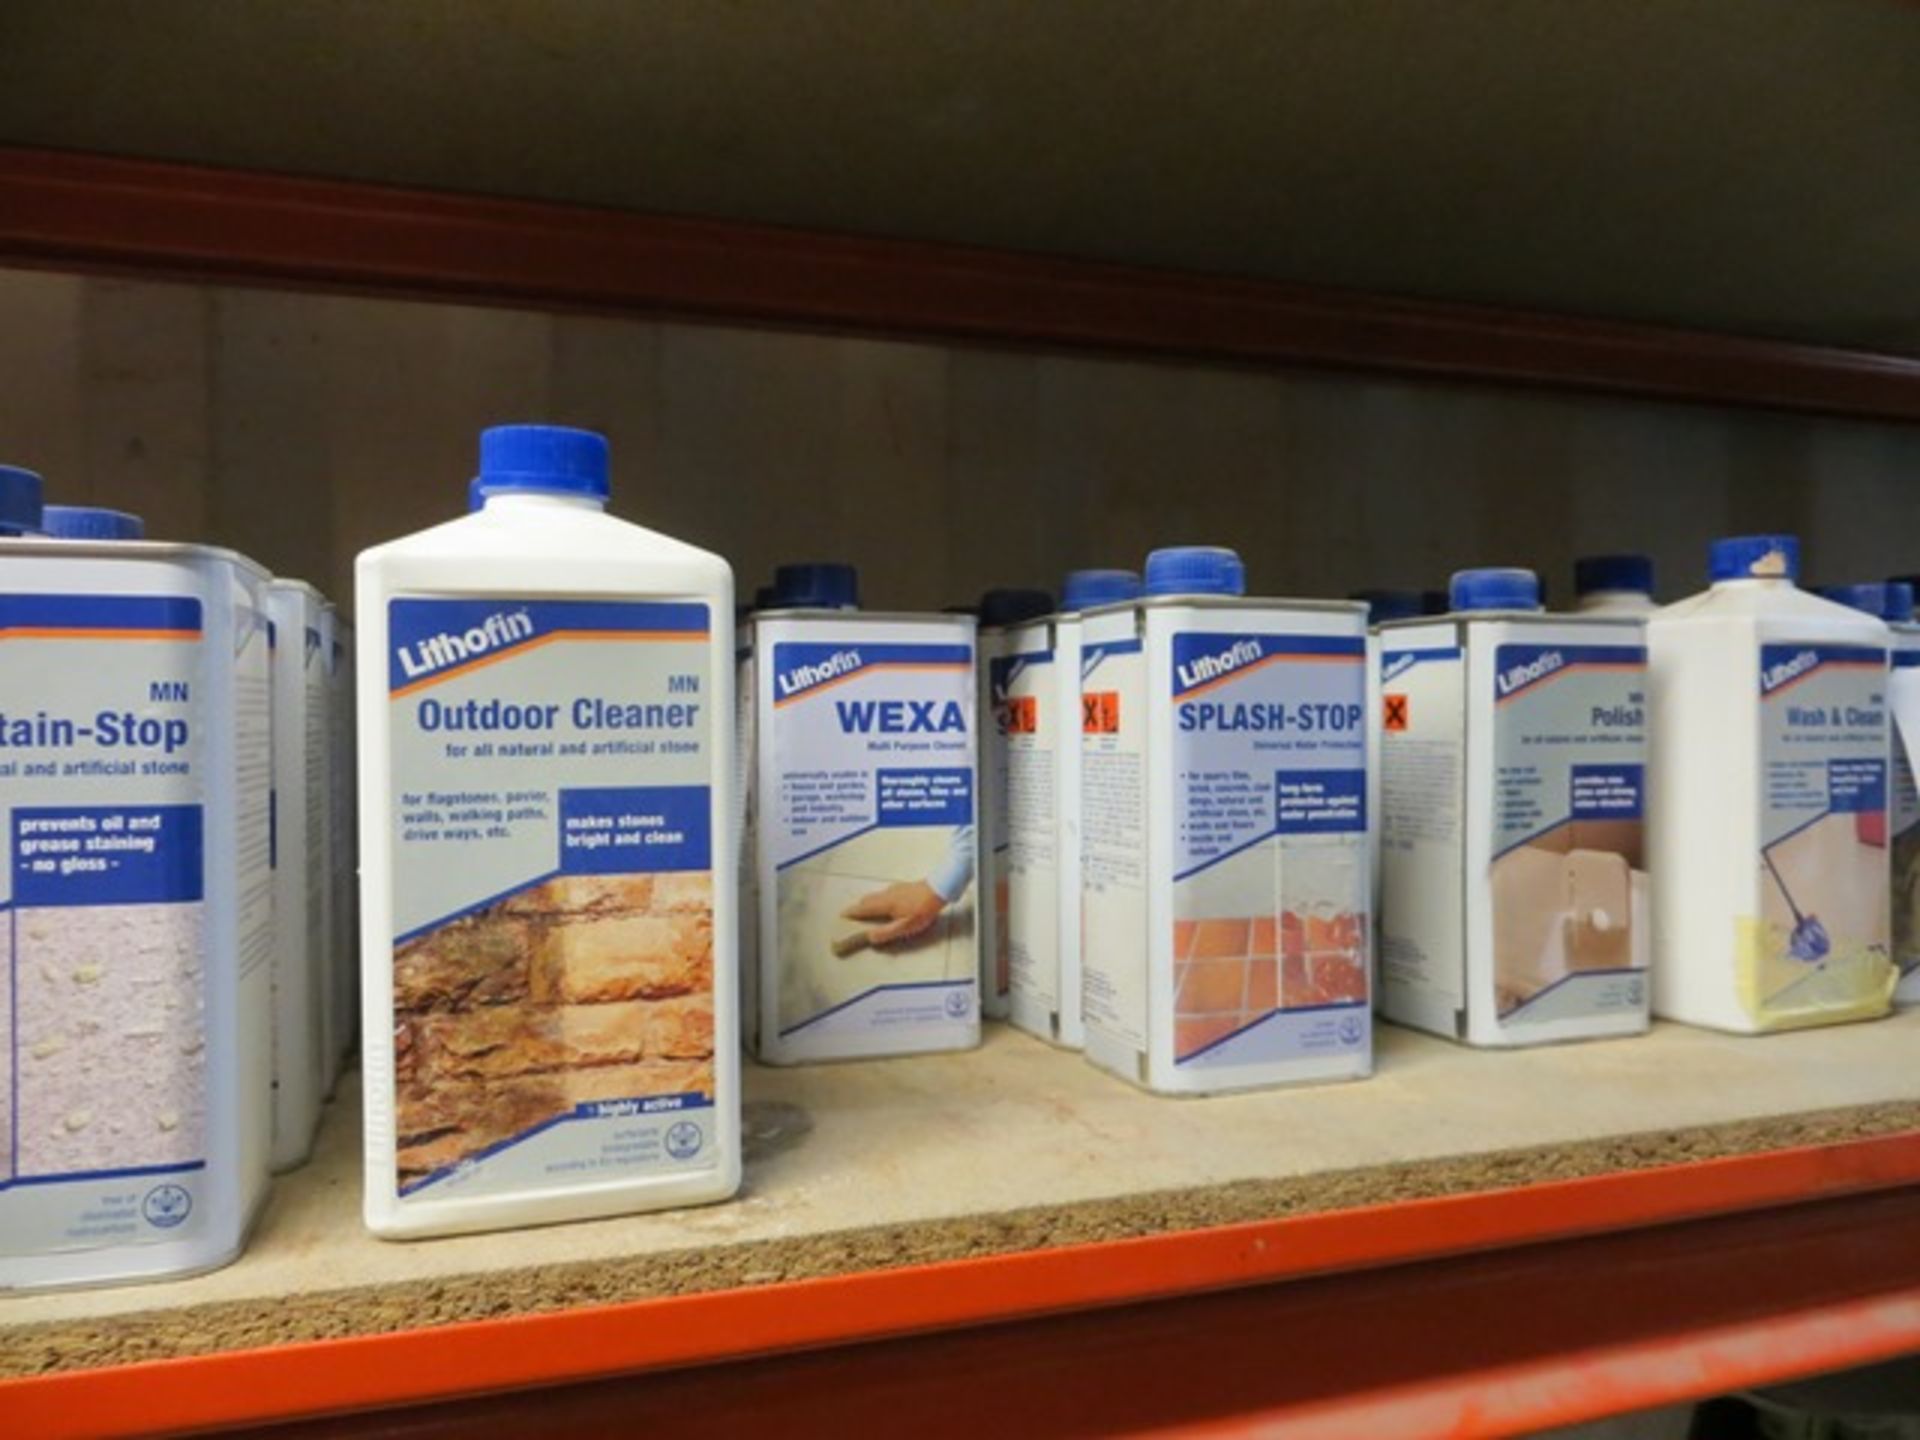 Shelf containing Lithofin Rust-Ex, Easy-Care, Stain-Stop, Outdoor-Cleaner, Wexa, Splash-Stop, - Image 2 of 4